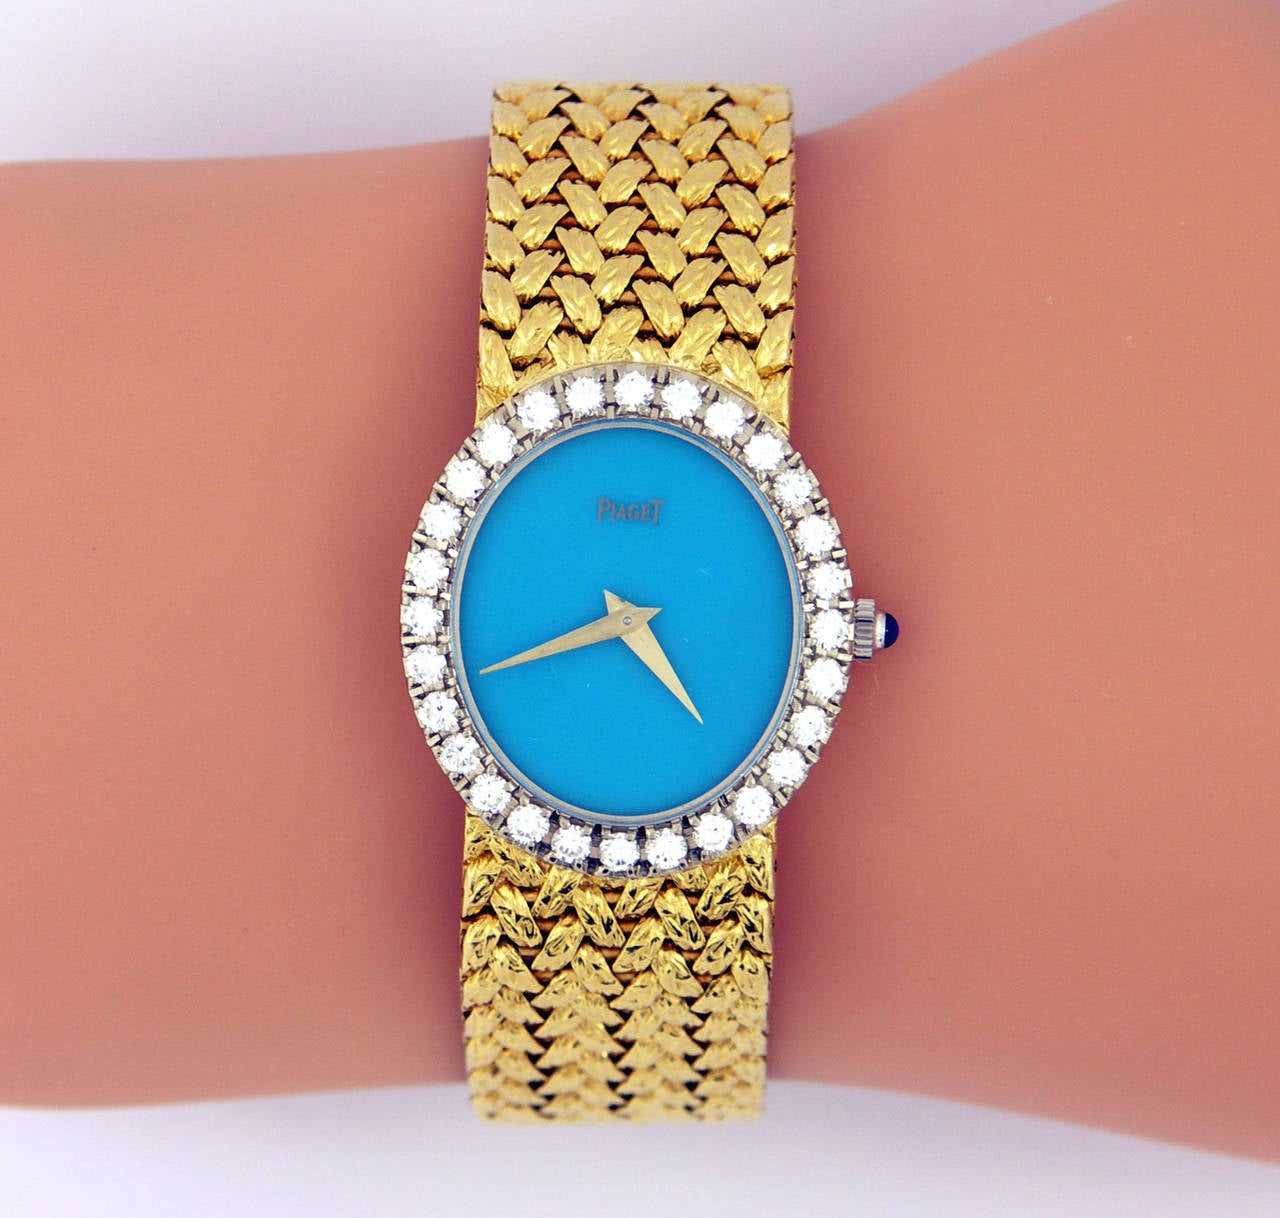 One ladies Piaget wristwatch, with an amazing, robin's egg, turquoise dial. The dial is surrounded by a bezel measuring 27mm long, and 24mm wide, and is set with a total of 1.25ct of round brilliant cut diamonds. The woven band is beautifully